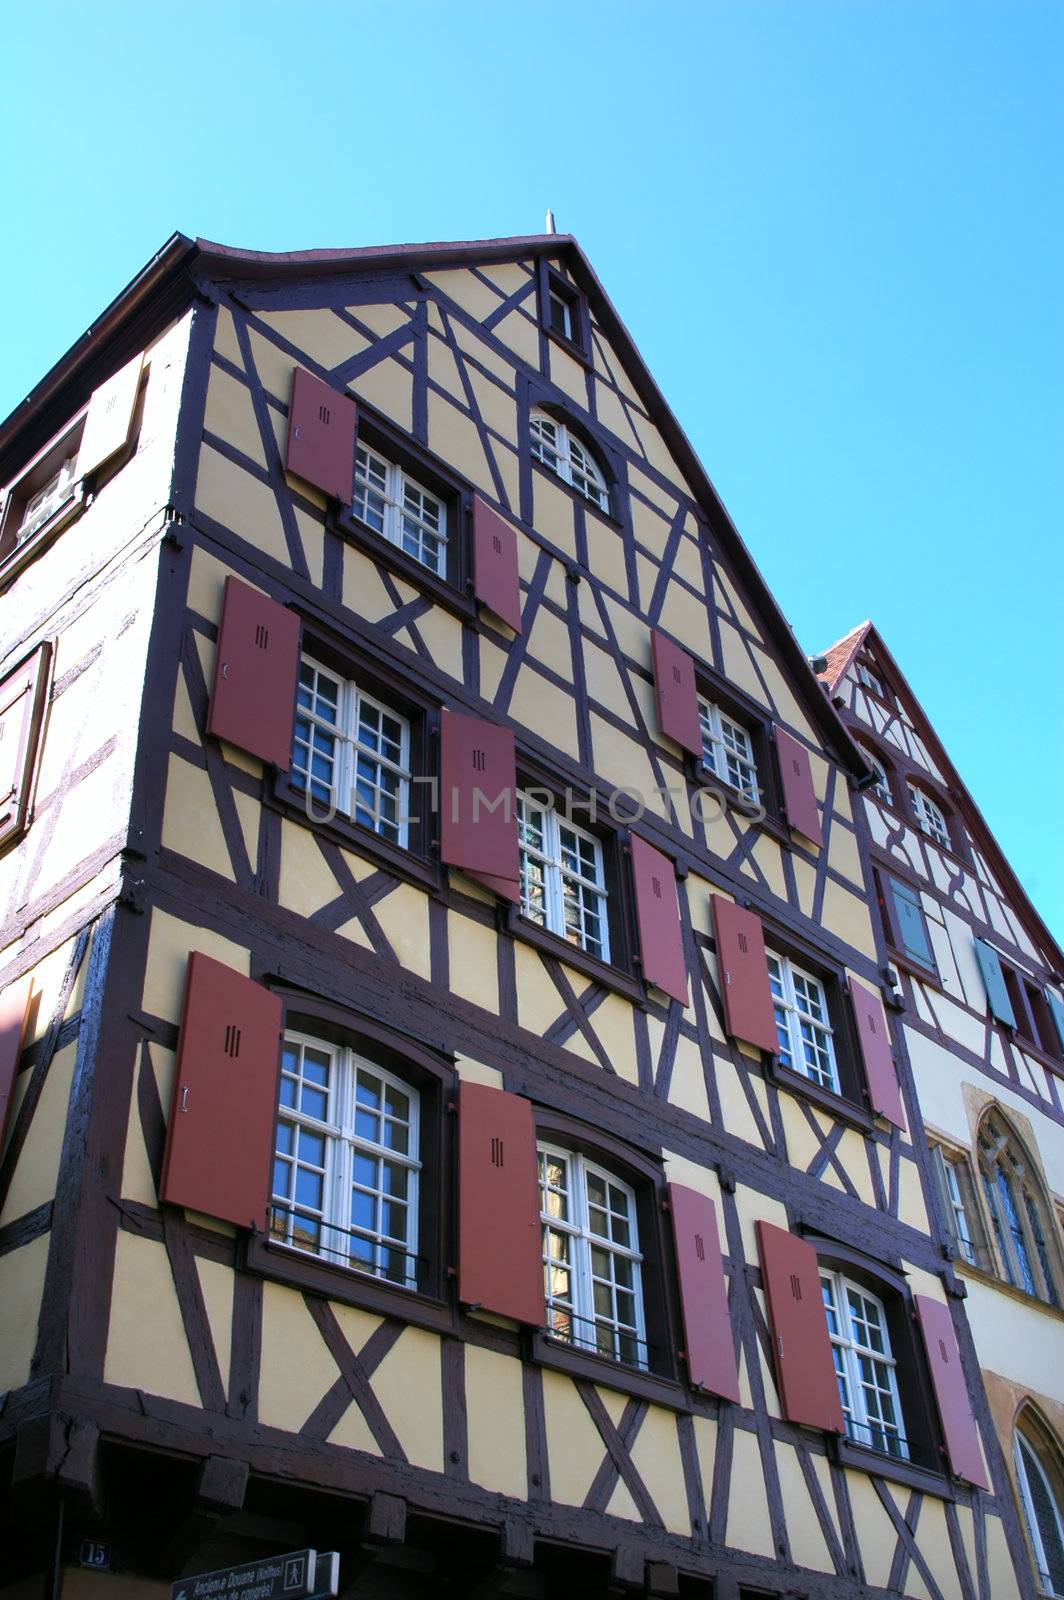 Alsace typical traditional House (Colmar, France) by raalves